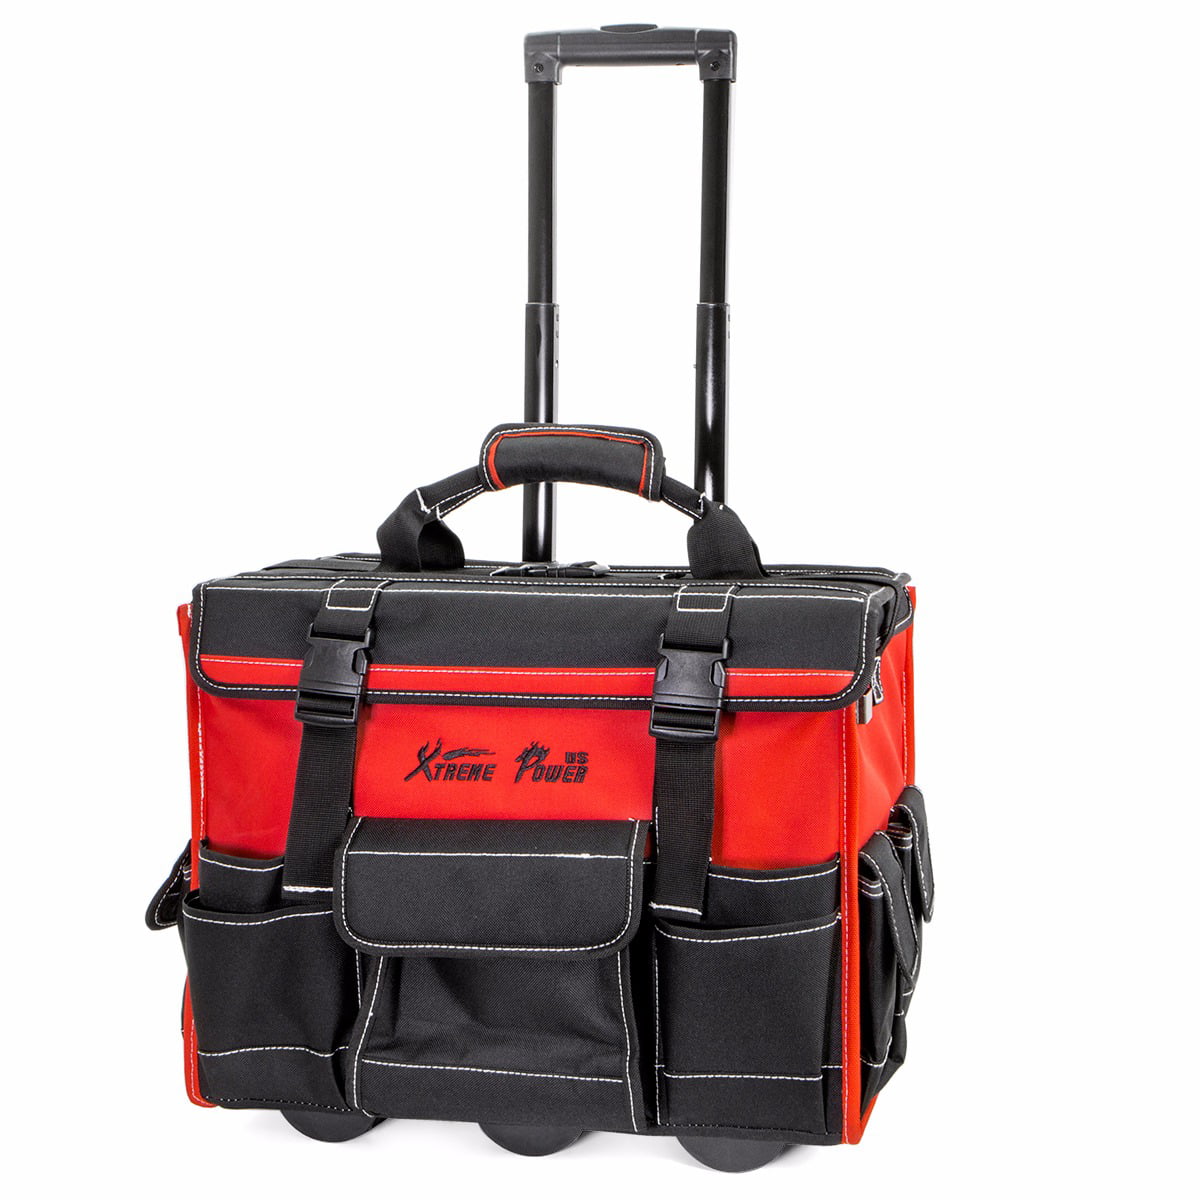 Rollaway LARGE Rolling Tool Bag On Wheels Carry-on Nylon Bag Case Storage